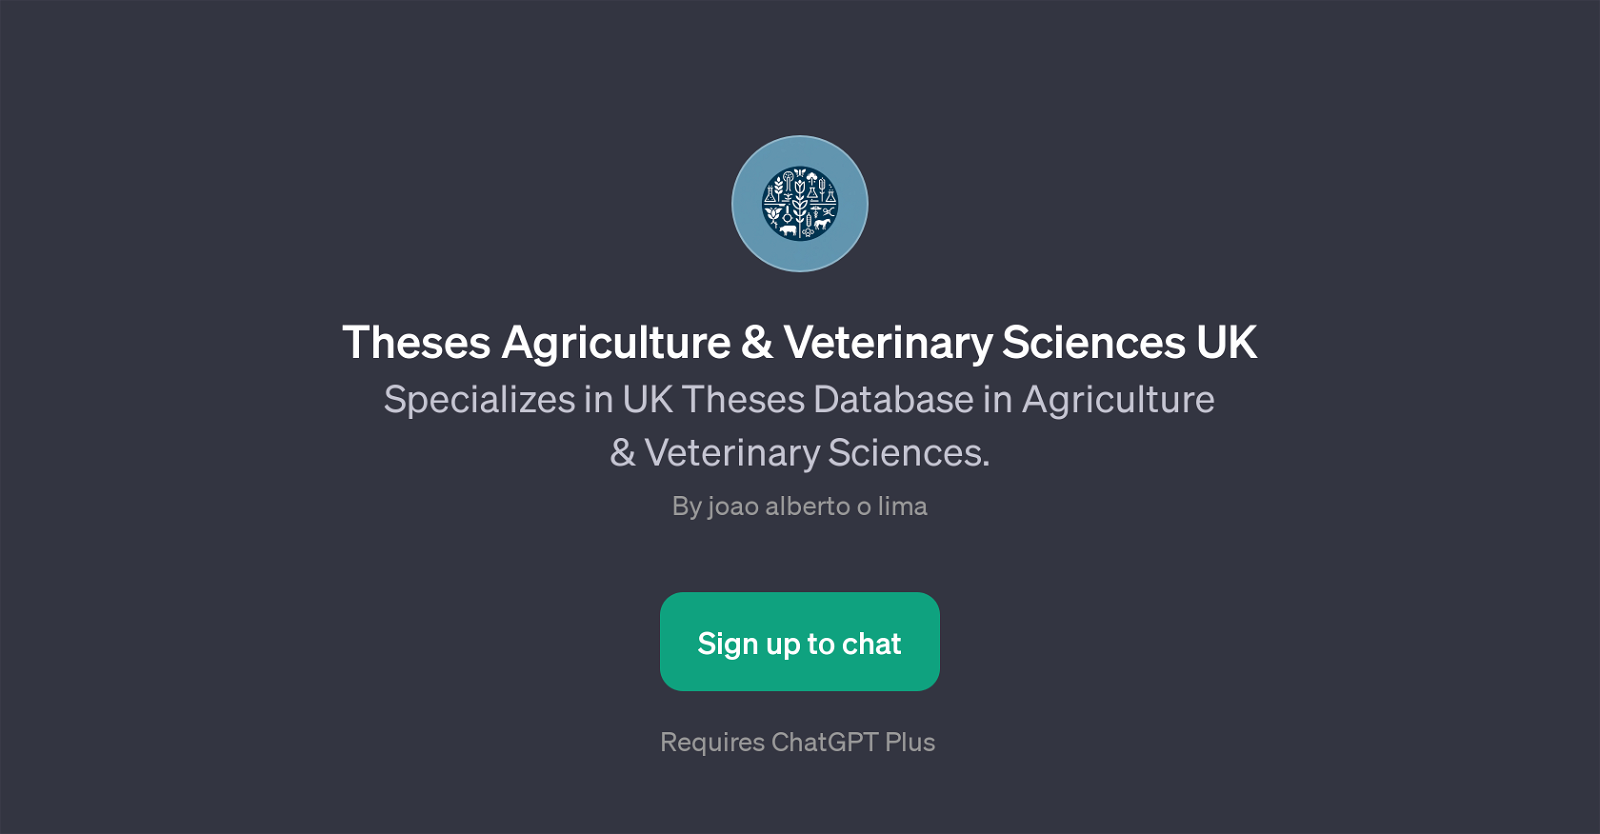 Theses Agriculture & Veterinary Sciences UK website